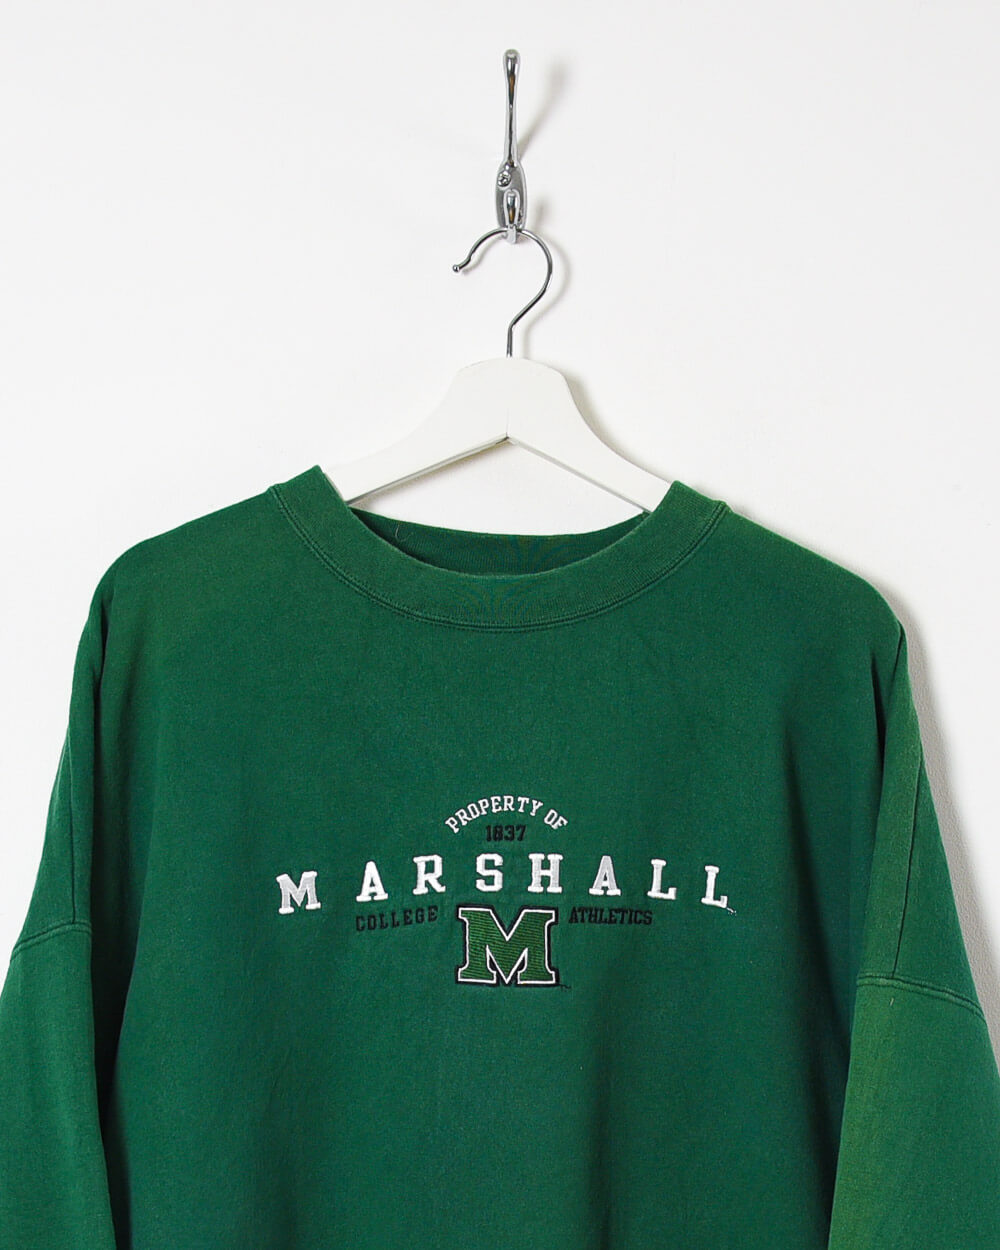 AS Sports Property of Marshall College Athletics Sweatshirt - XX-Large - Domno Vintage 90s, 80s, 00s Retro and Vintage Clothing 